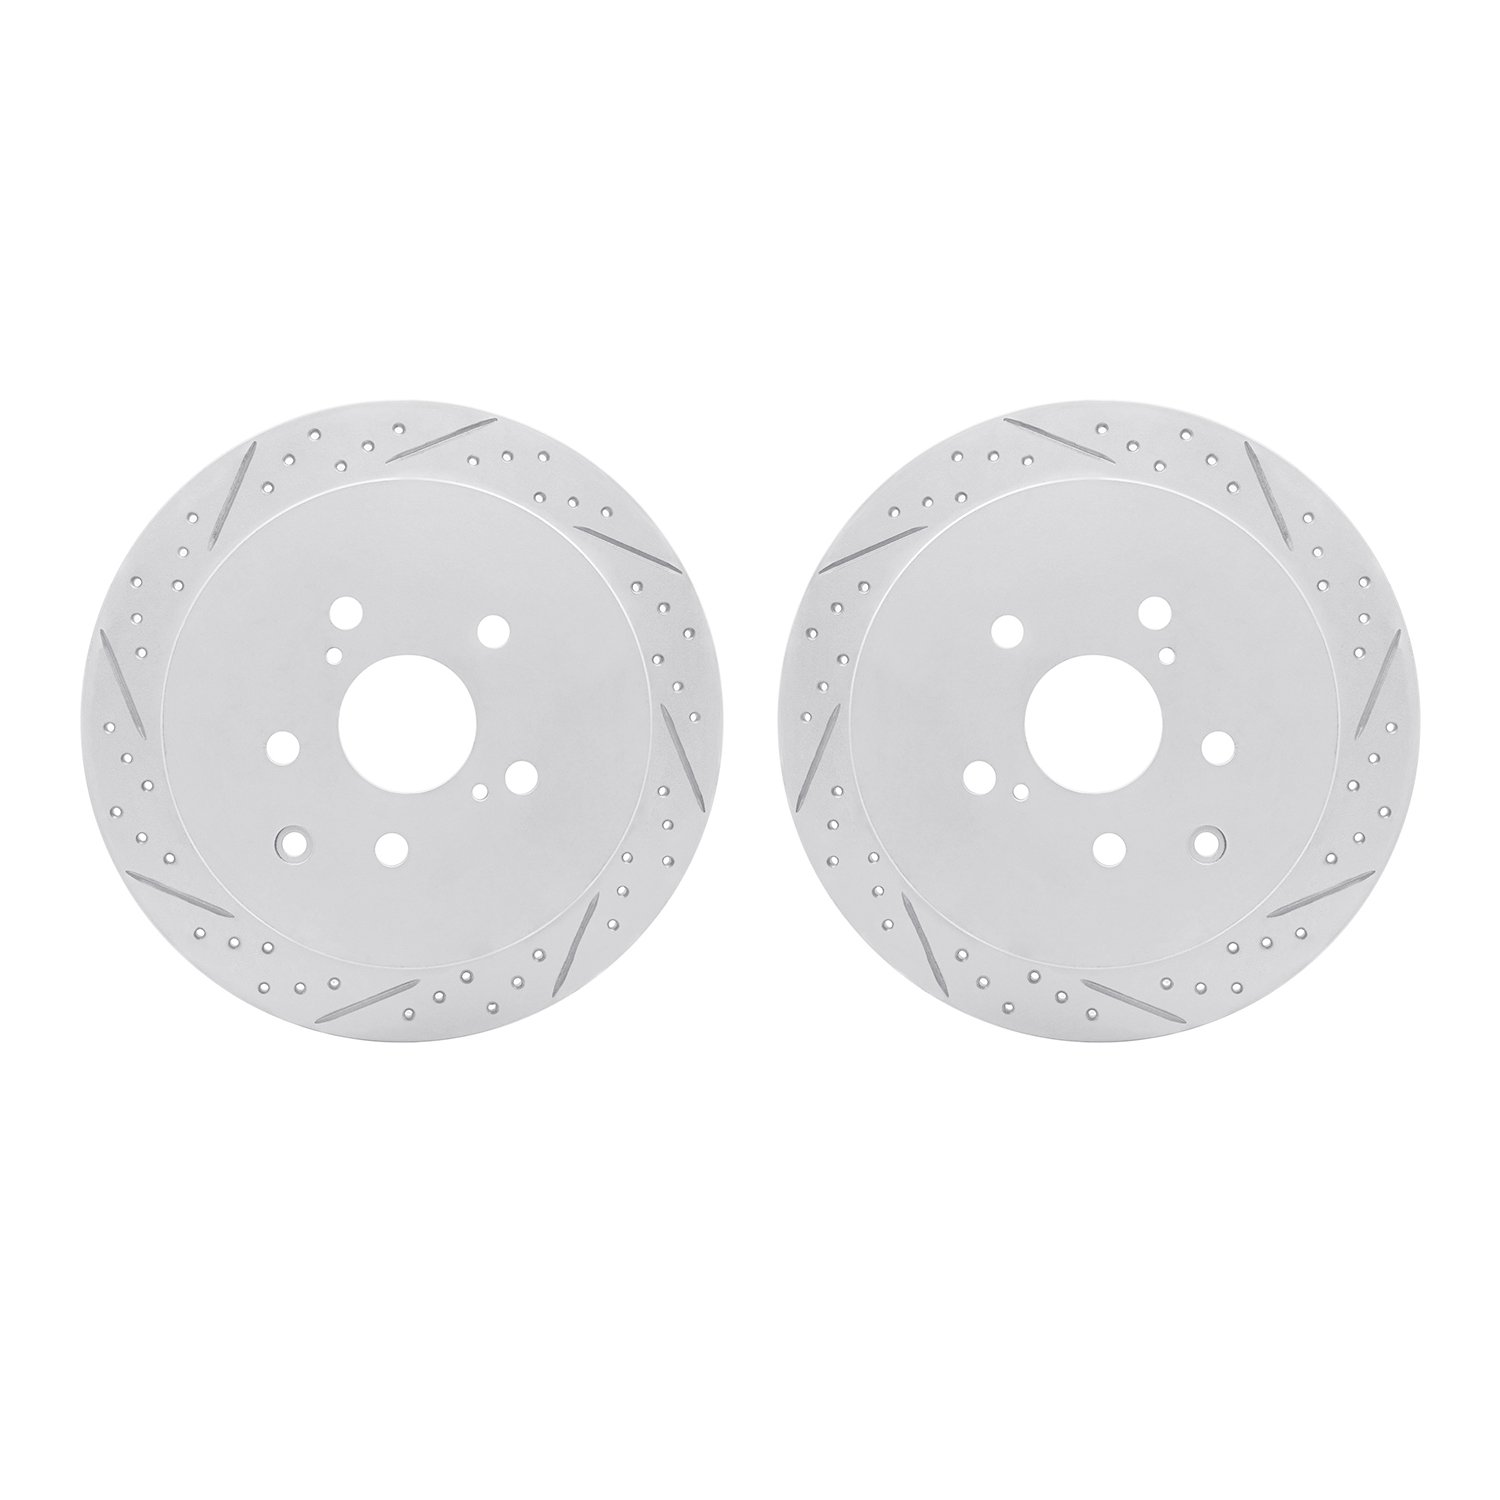 2002-76052 Geoperformance Drilled/Slotted Brake Rotors, 2010-2020 Lexus/Toyota/Scion, Position: Rear